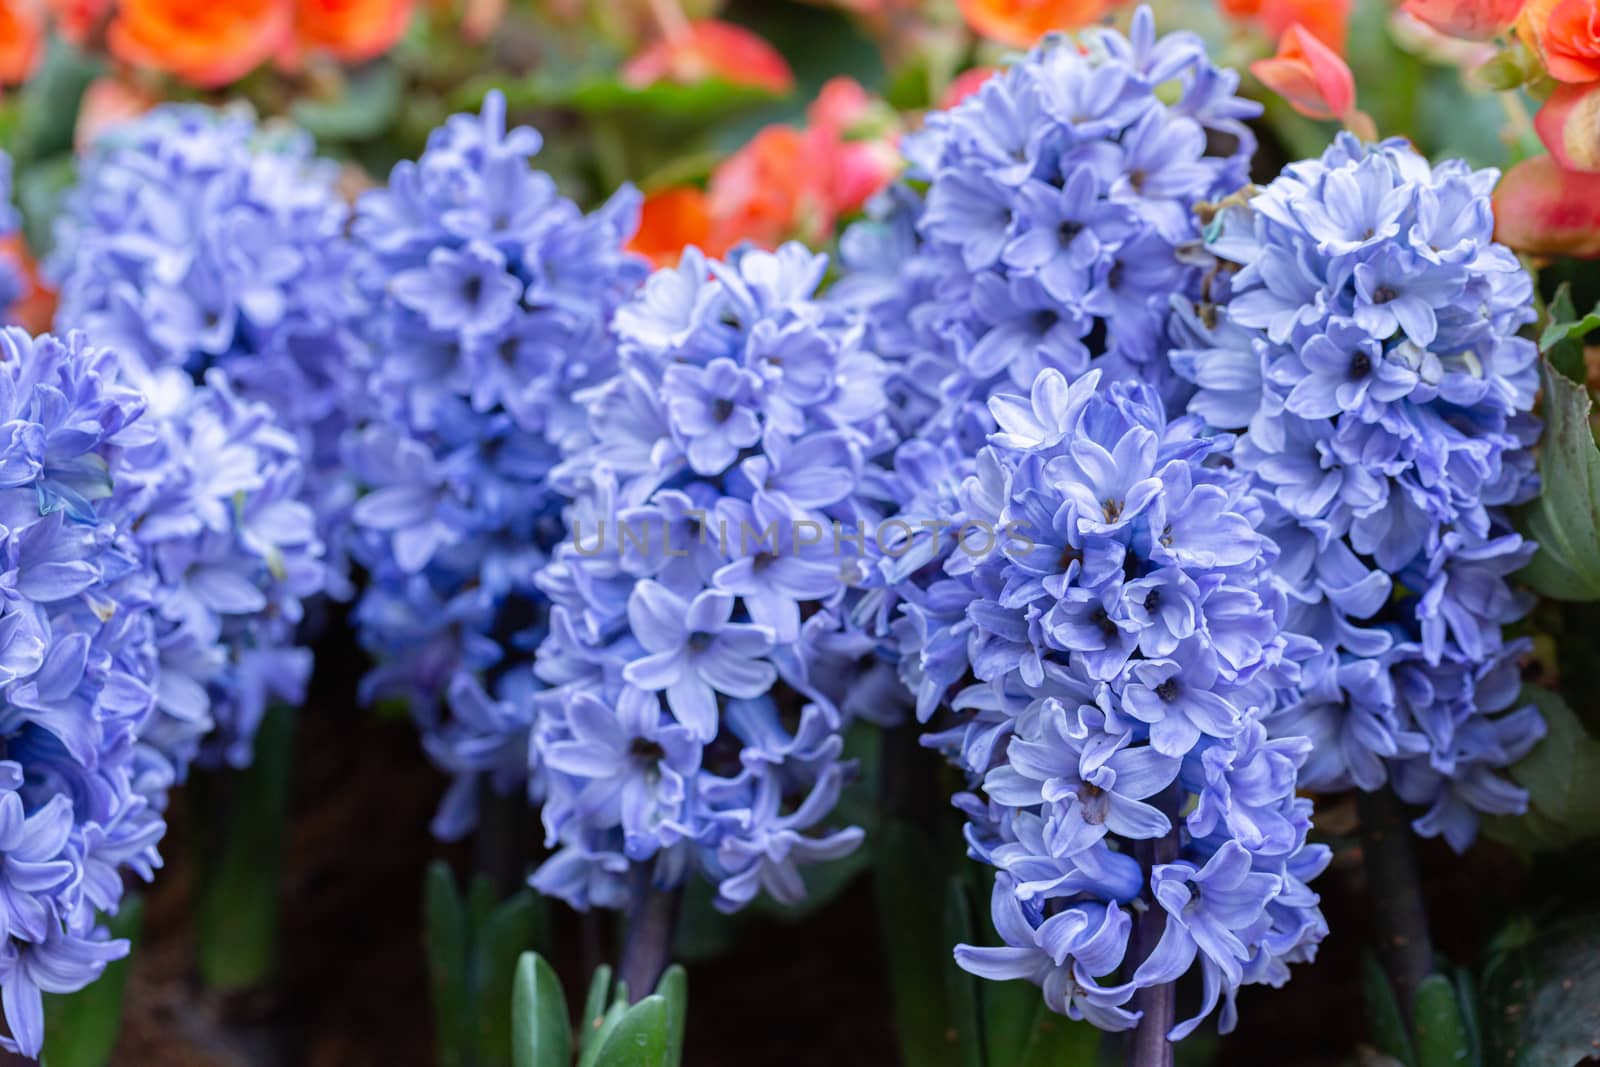 Hyacinth flower in garden at sunny summer or spring day for postcard beauty decoration and agriculture design.